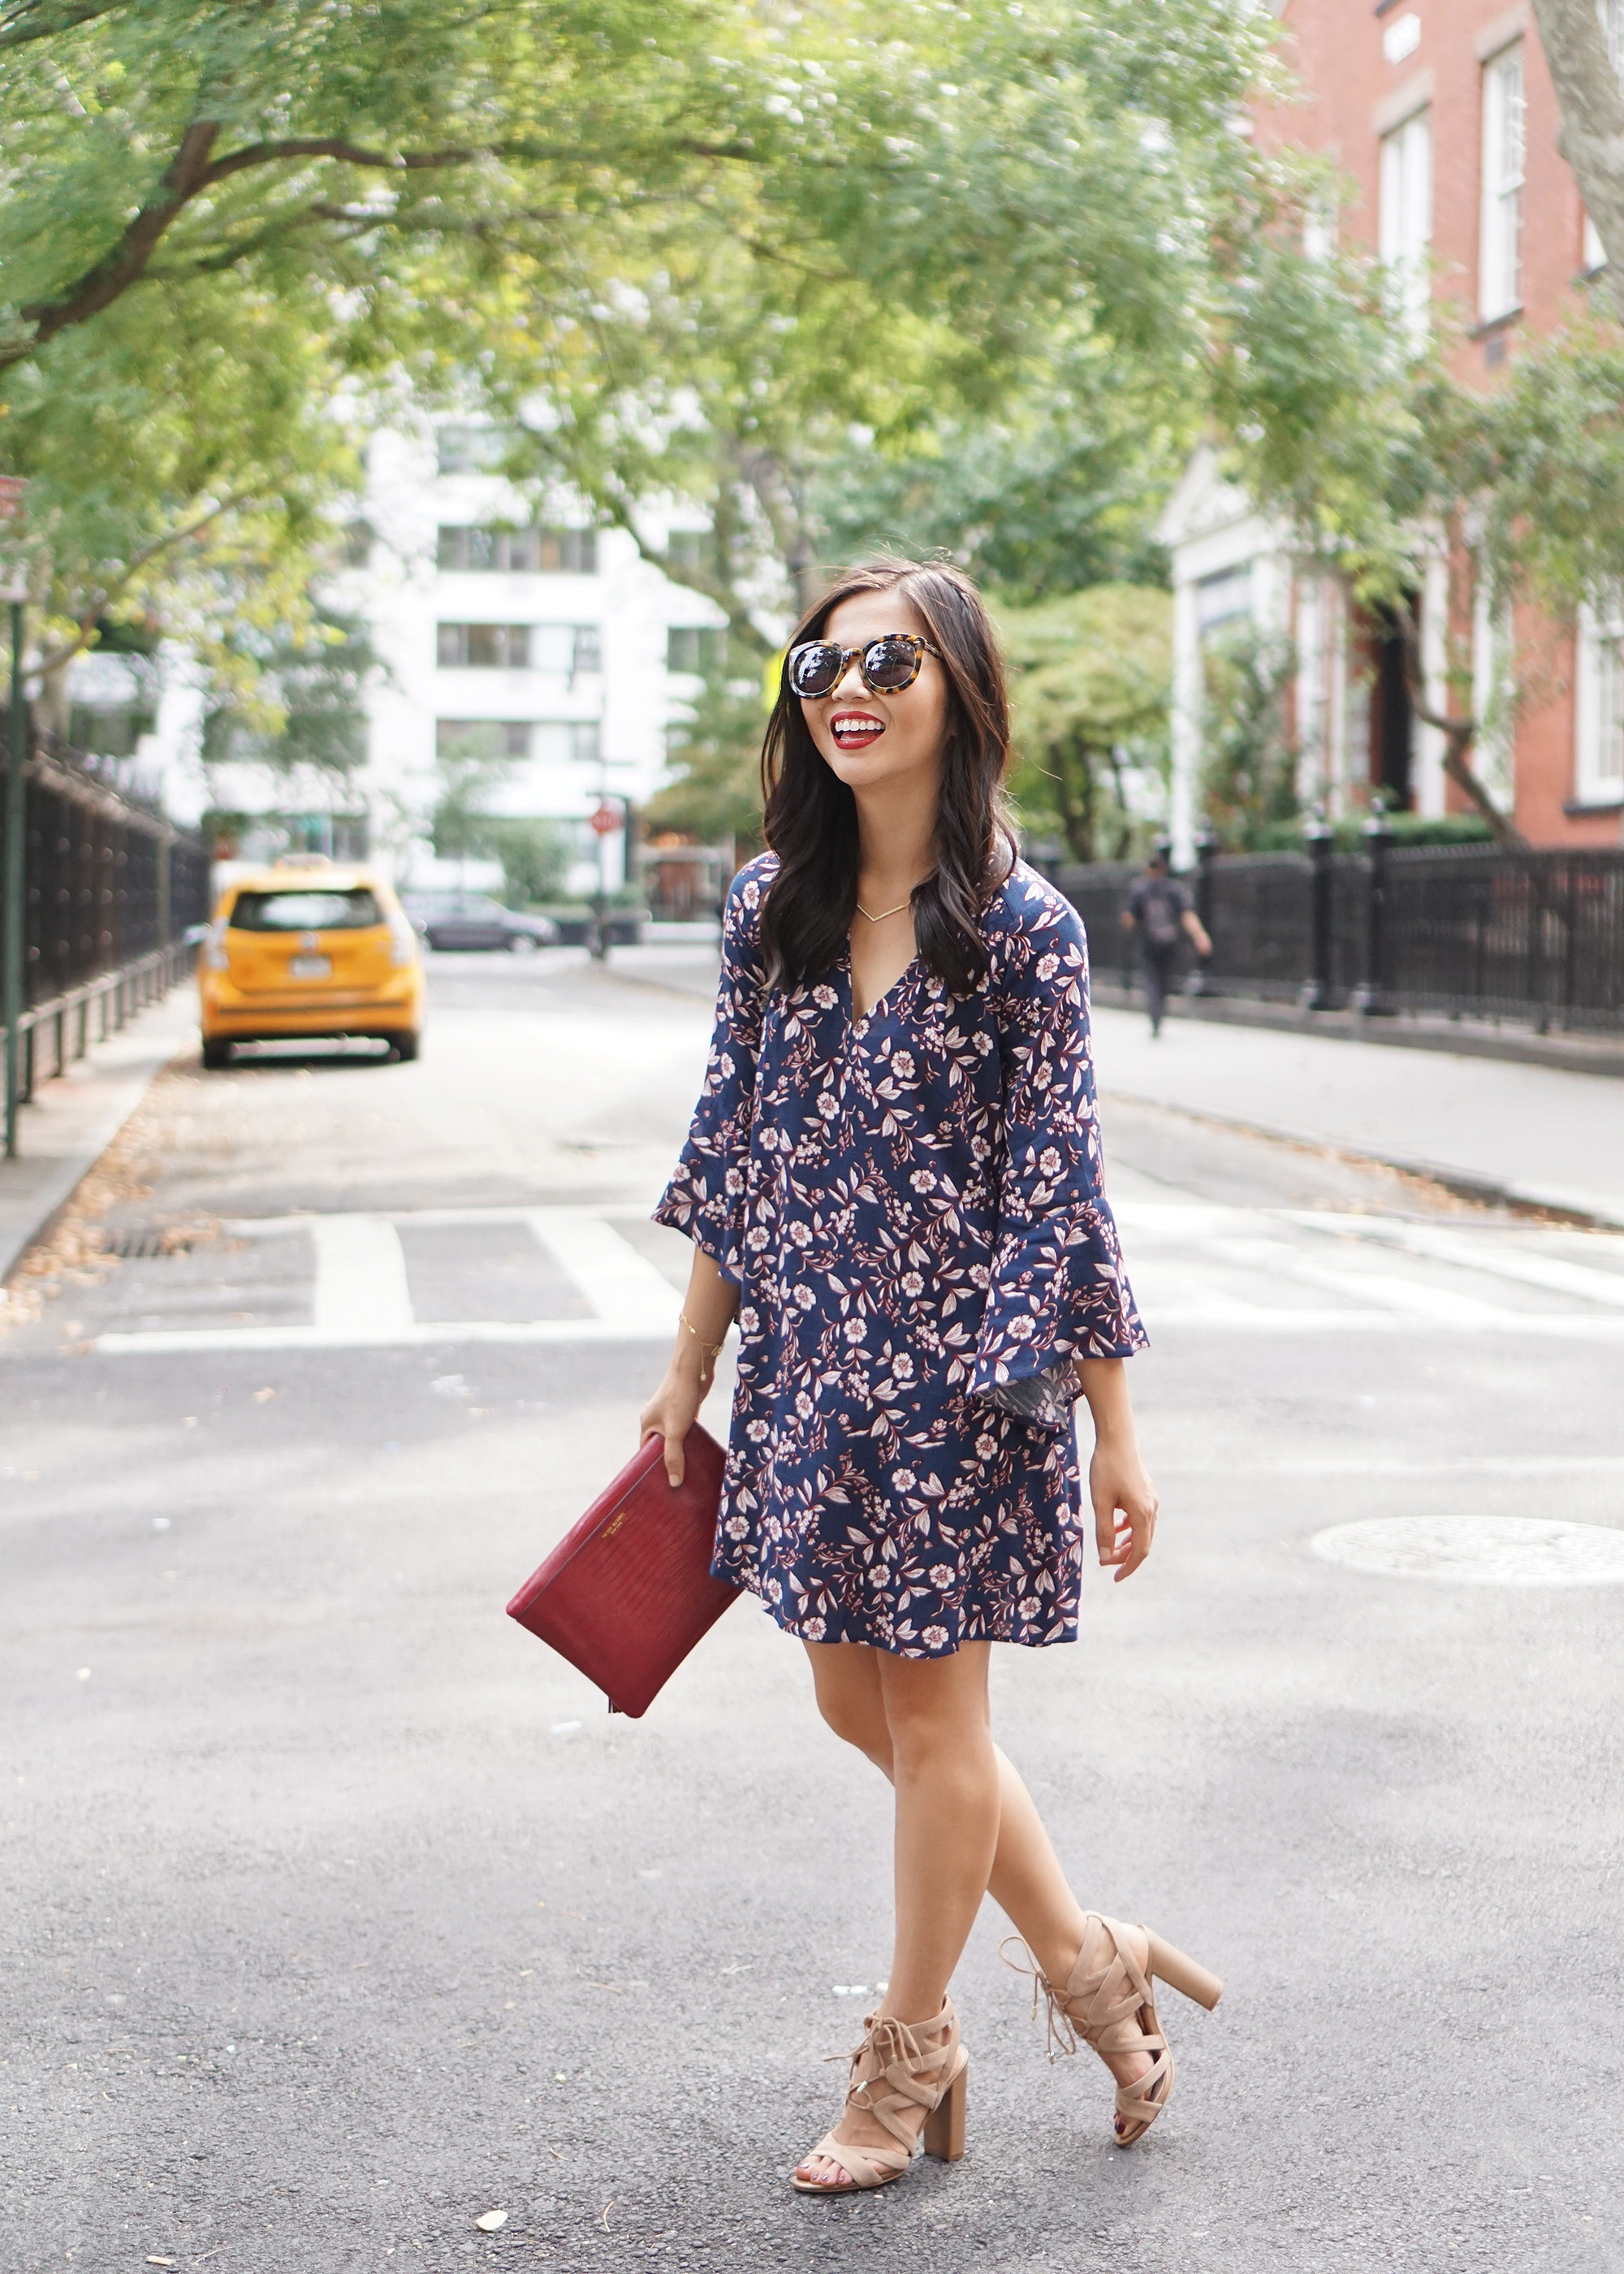 Skirt The Rules / Fall Floral Print Bell Sleeve Dress